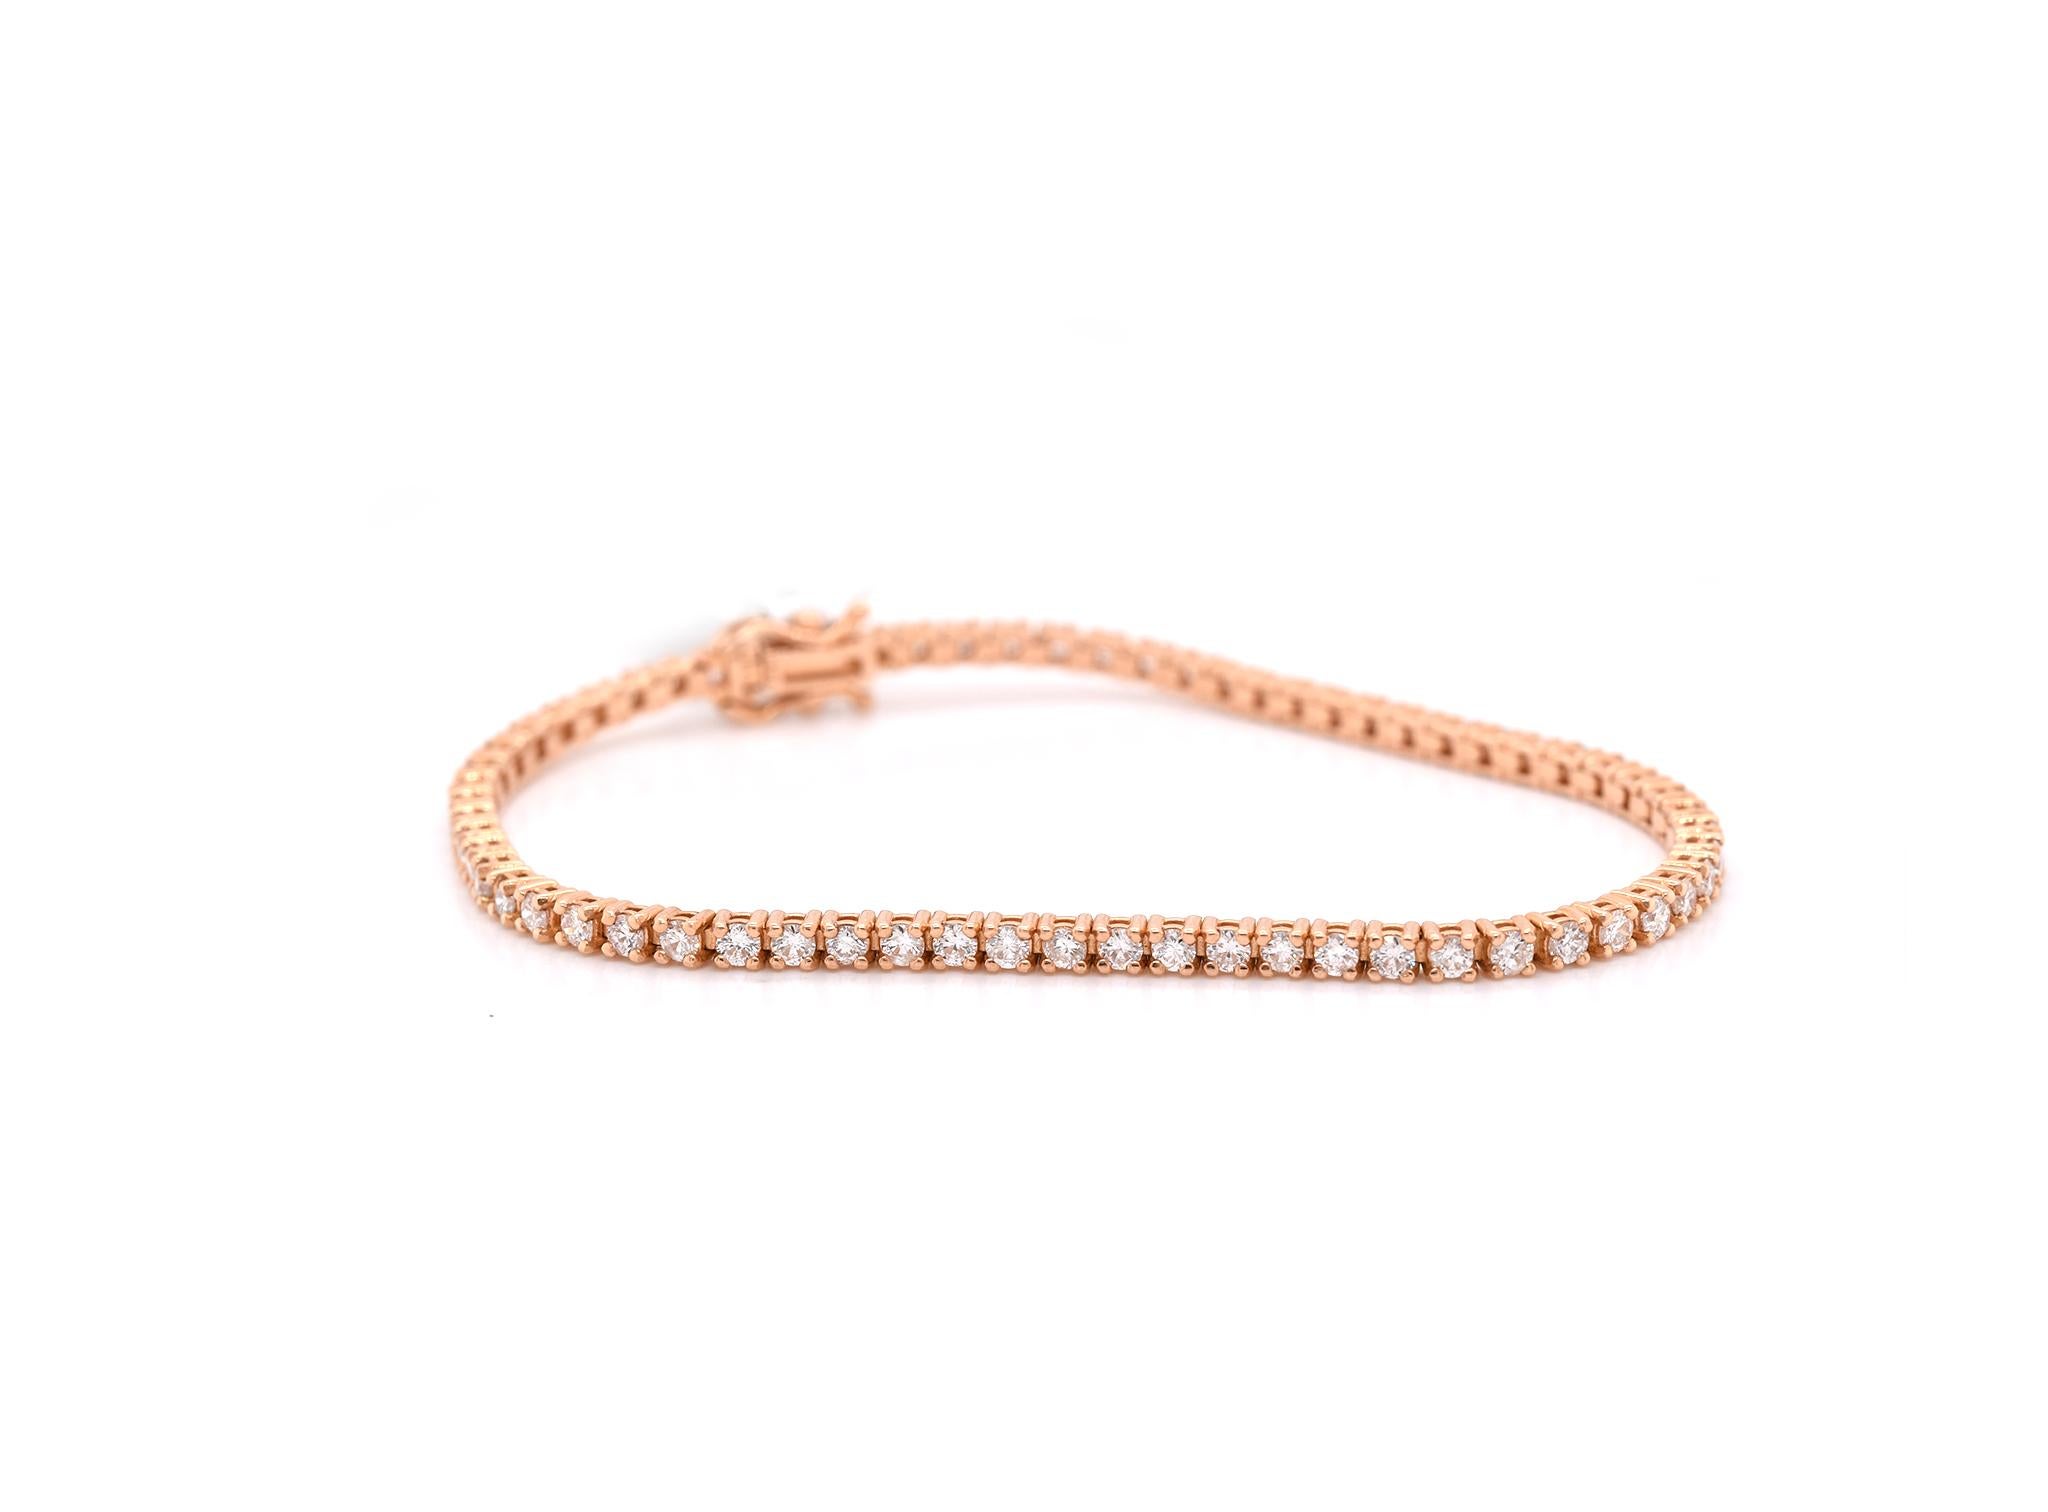 Material: 18k rose gold
Diamonds: 65 round brilliant cuts = 2.65cttw
Color: G
Clarity: VS1-2
Dimensions: bracelet measures 7-inches in length
Weight: 9.58 grams
